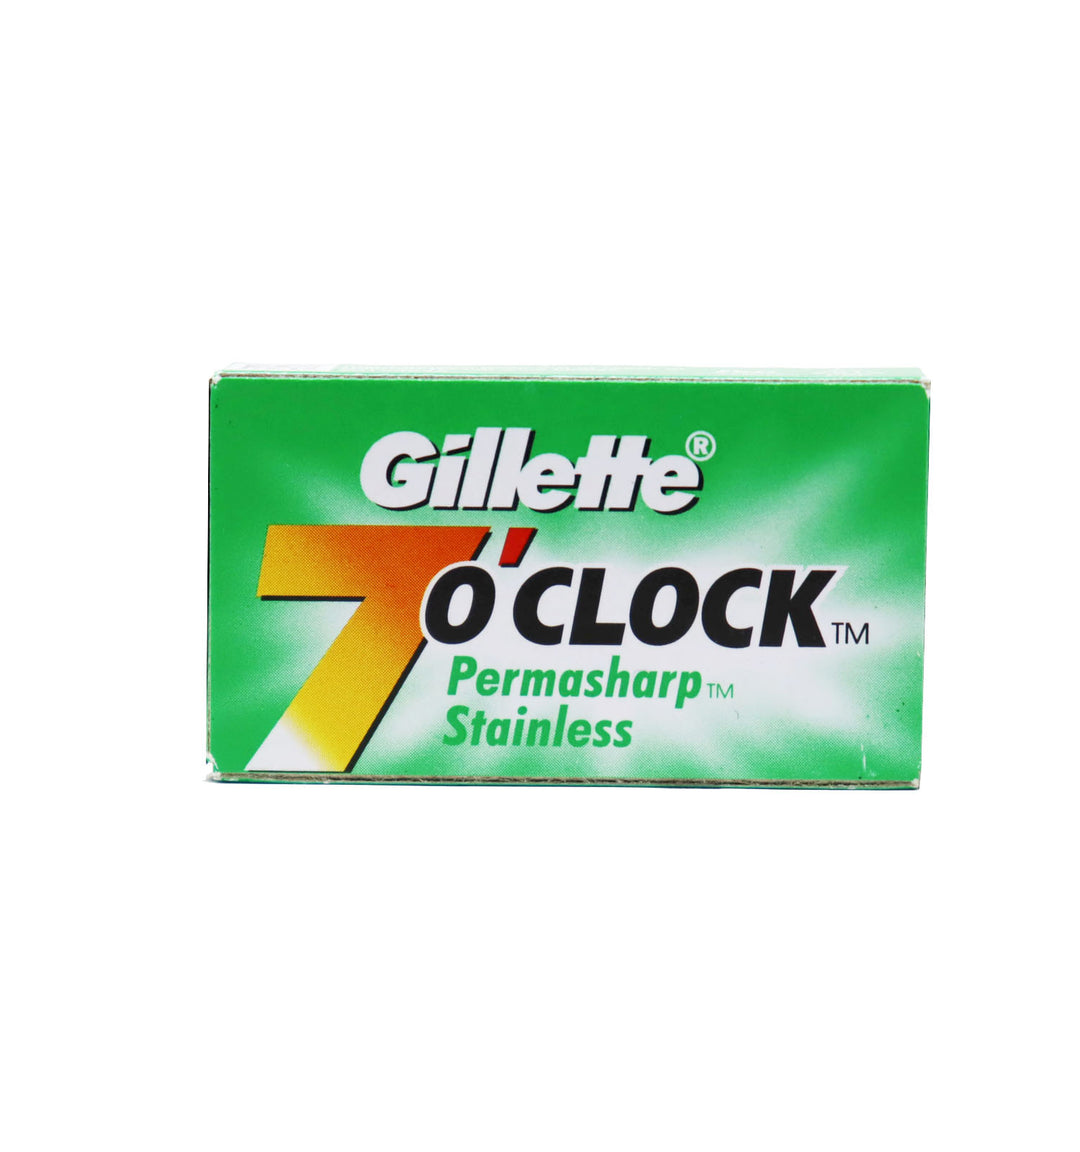 It is a pack of 10 Gillette 7'O Clock Permasharp Stainless razor blades.